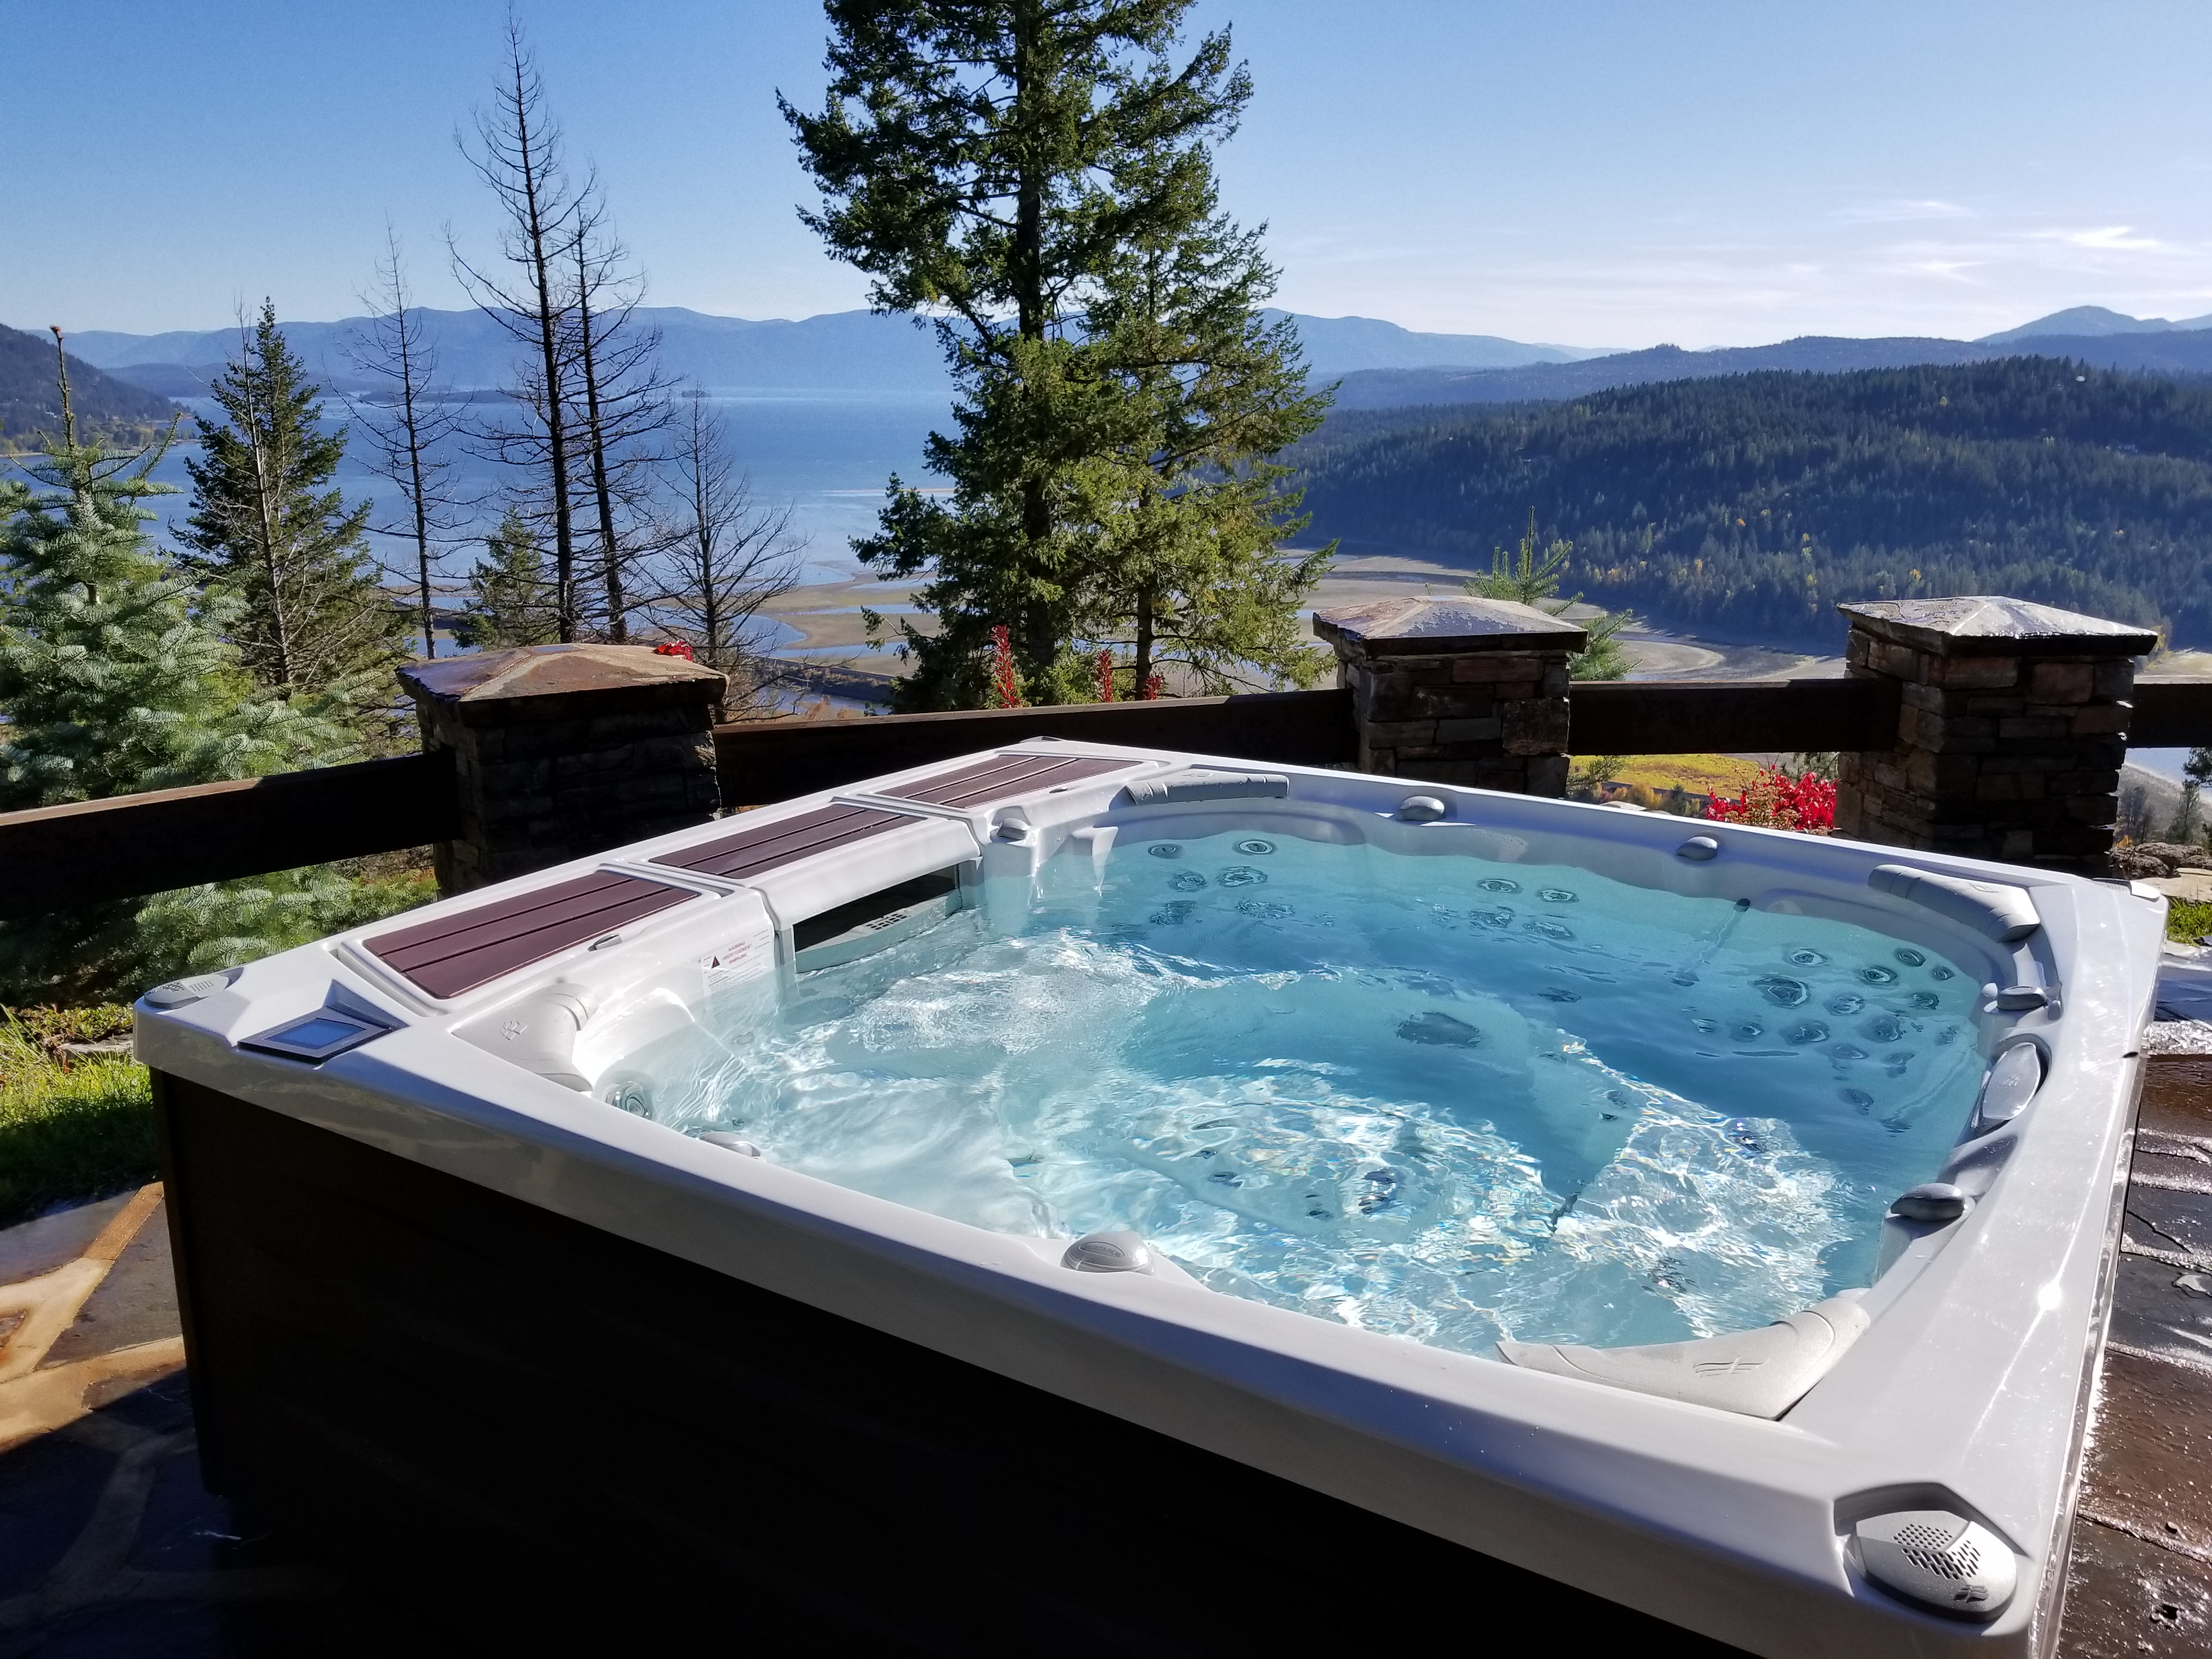 Varen Sociologie Regeren Hot Tubs Play Role for Improving American Lifestyles | Business Wire